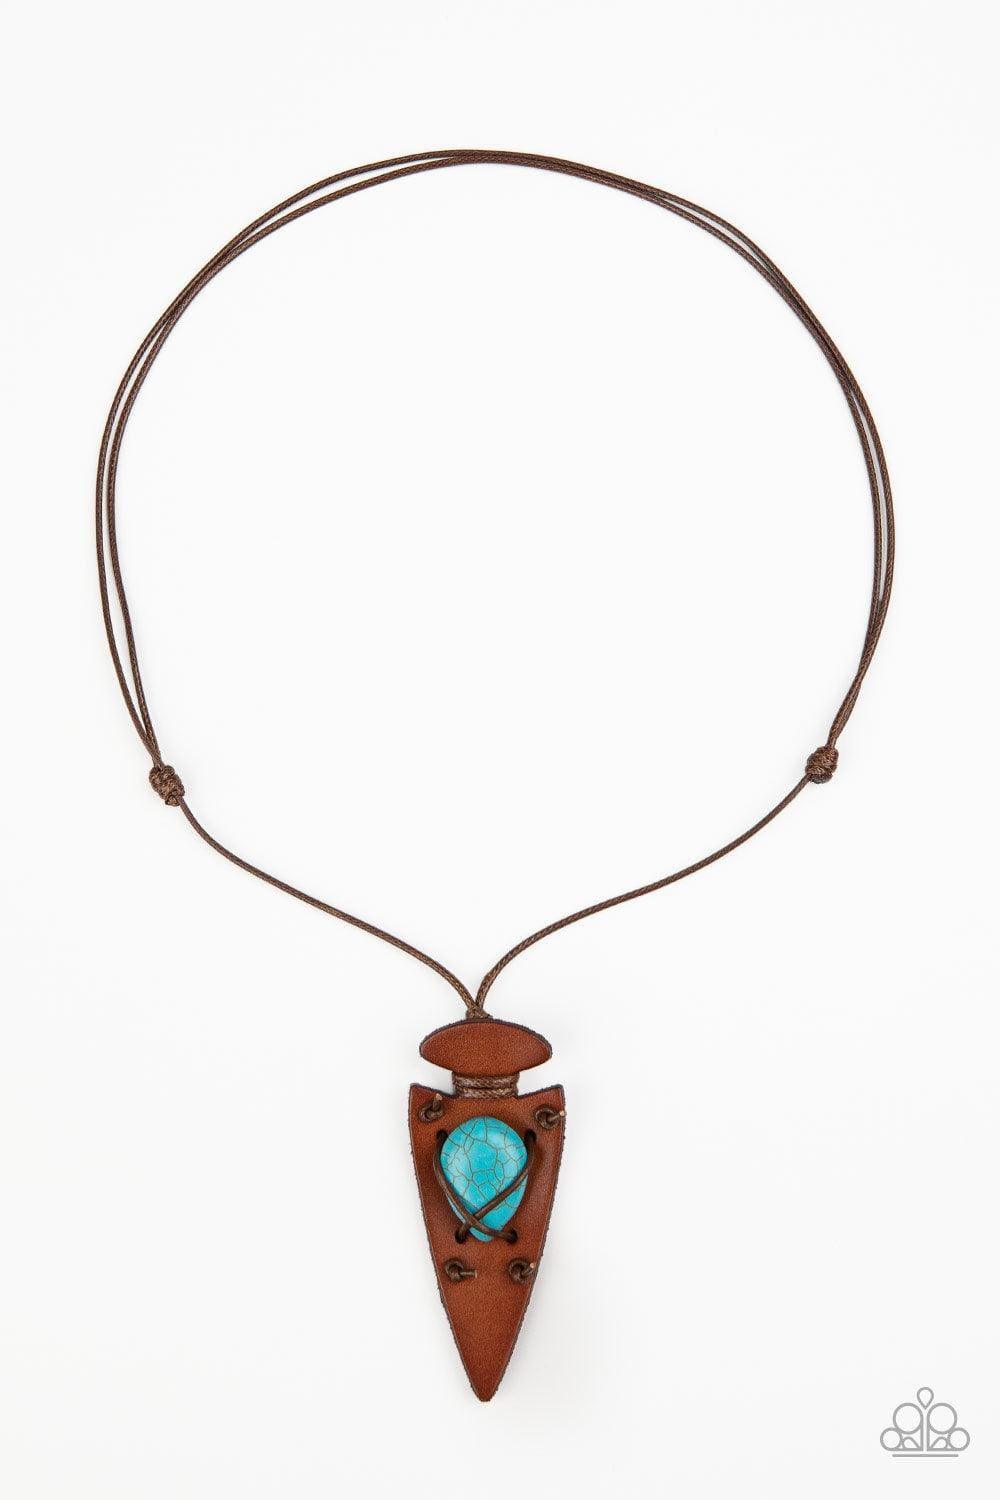 Paparazzi Accessories - Hold Your Arrowhead Up High - Turquoise Men's Urban Necklace - Bling by JessieK